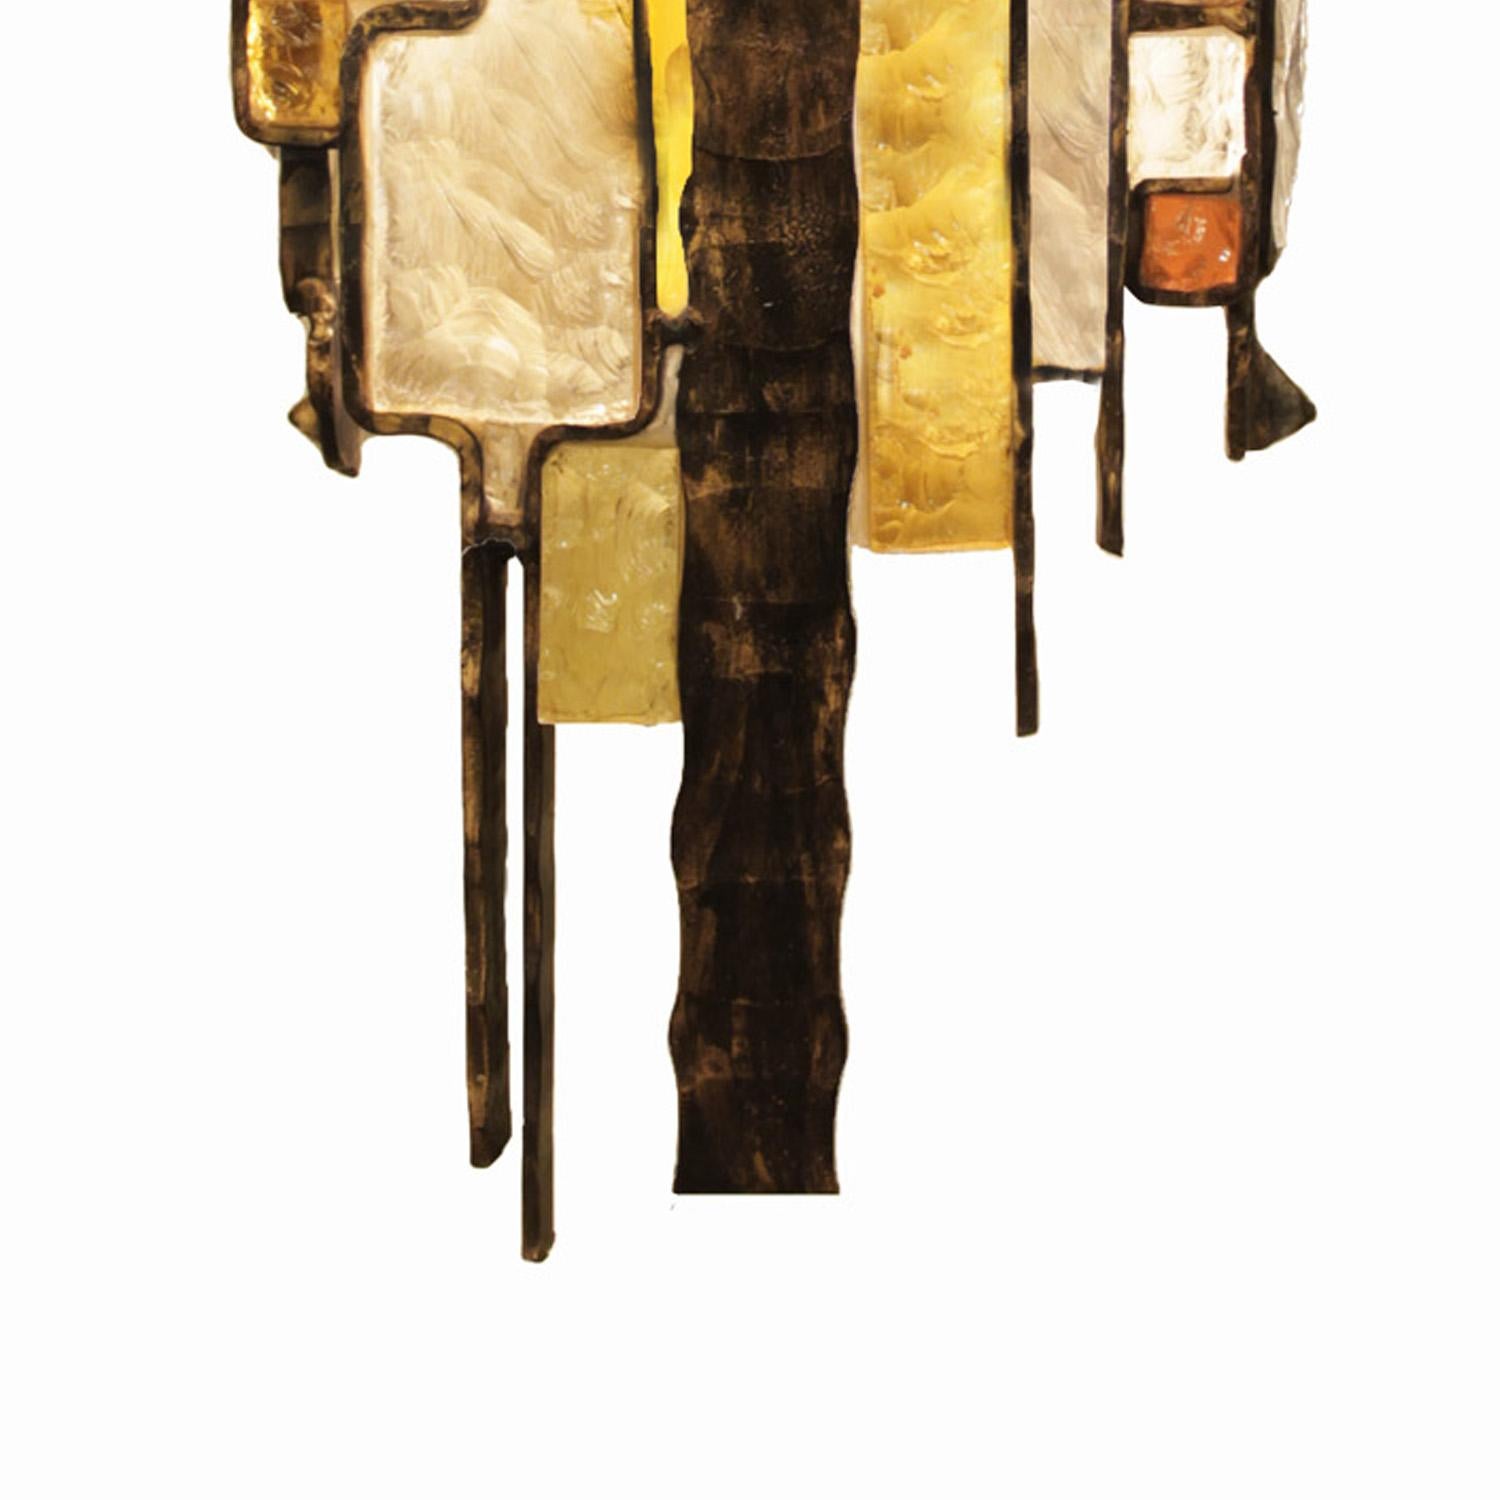 Albano Poli Brutalist Murano Glass and Iron Sconce 1960s ( 6 Available) For Sale 1